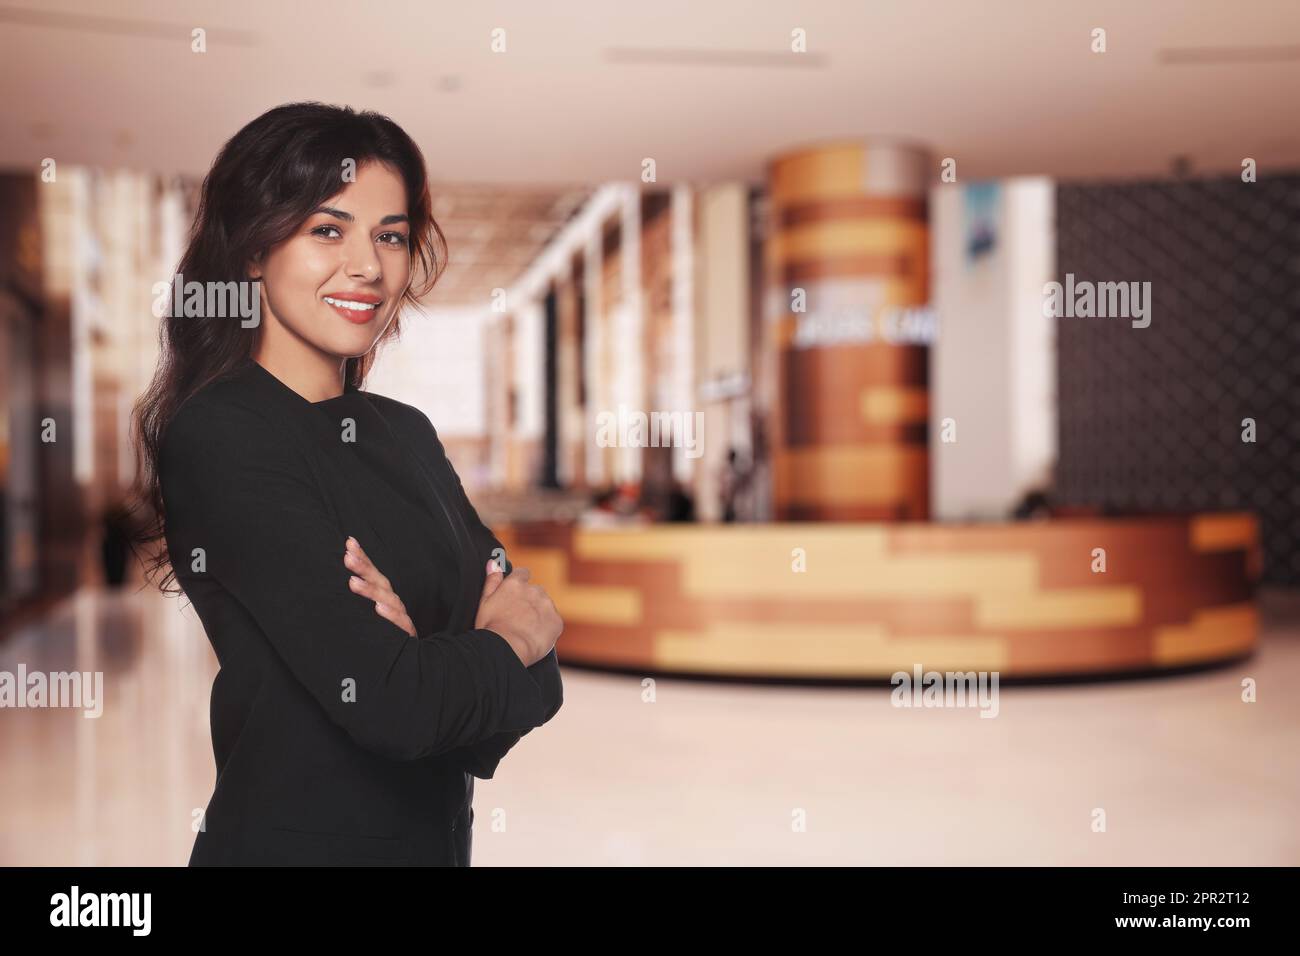 Portrait of hostess wearing uniform in shopping mall. Space for text Stock Photo